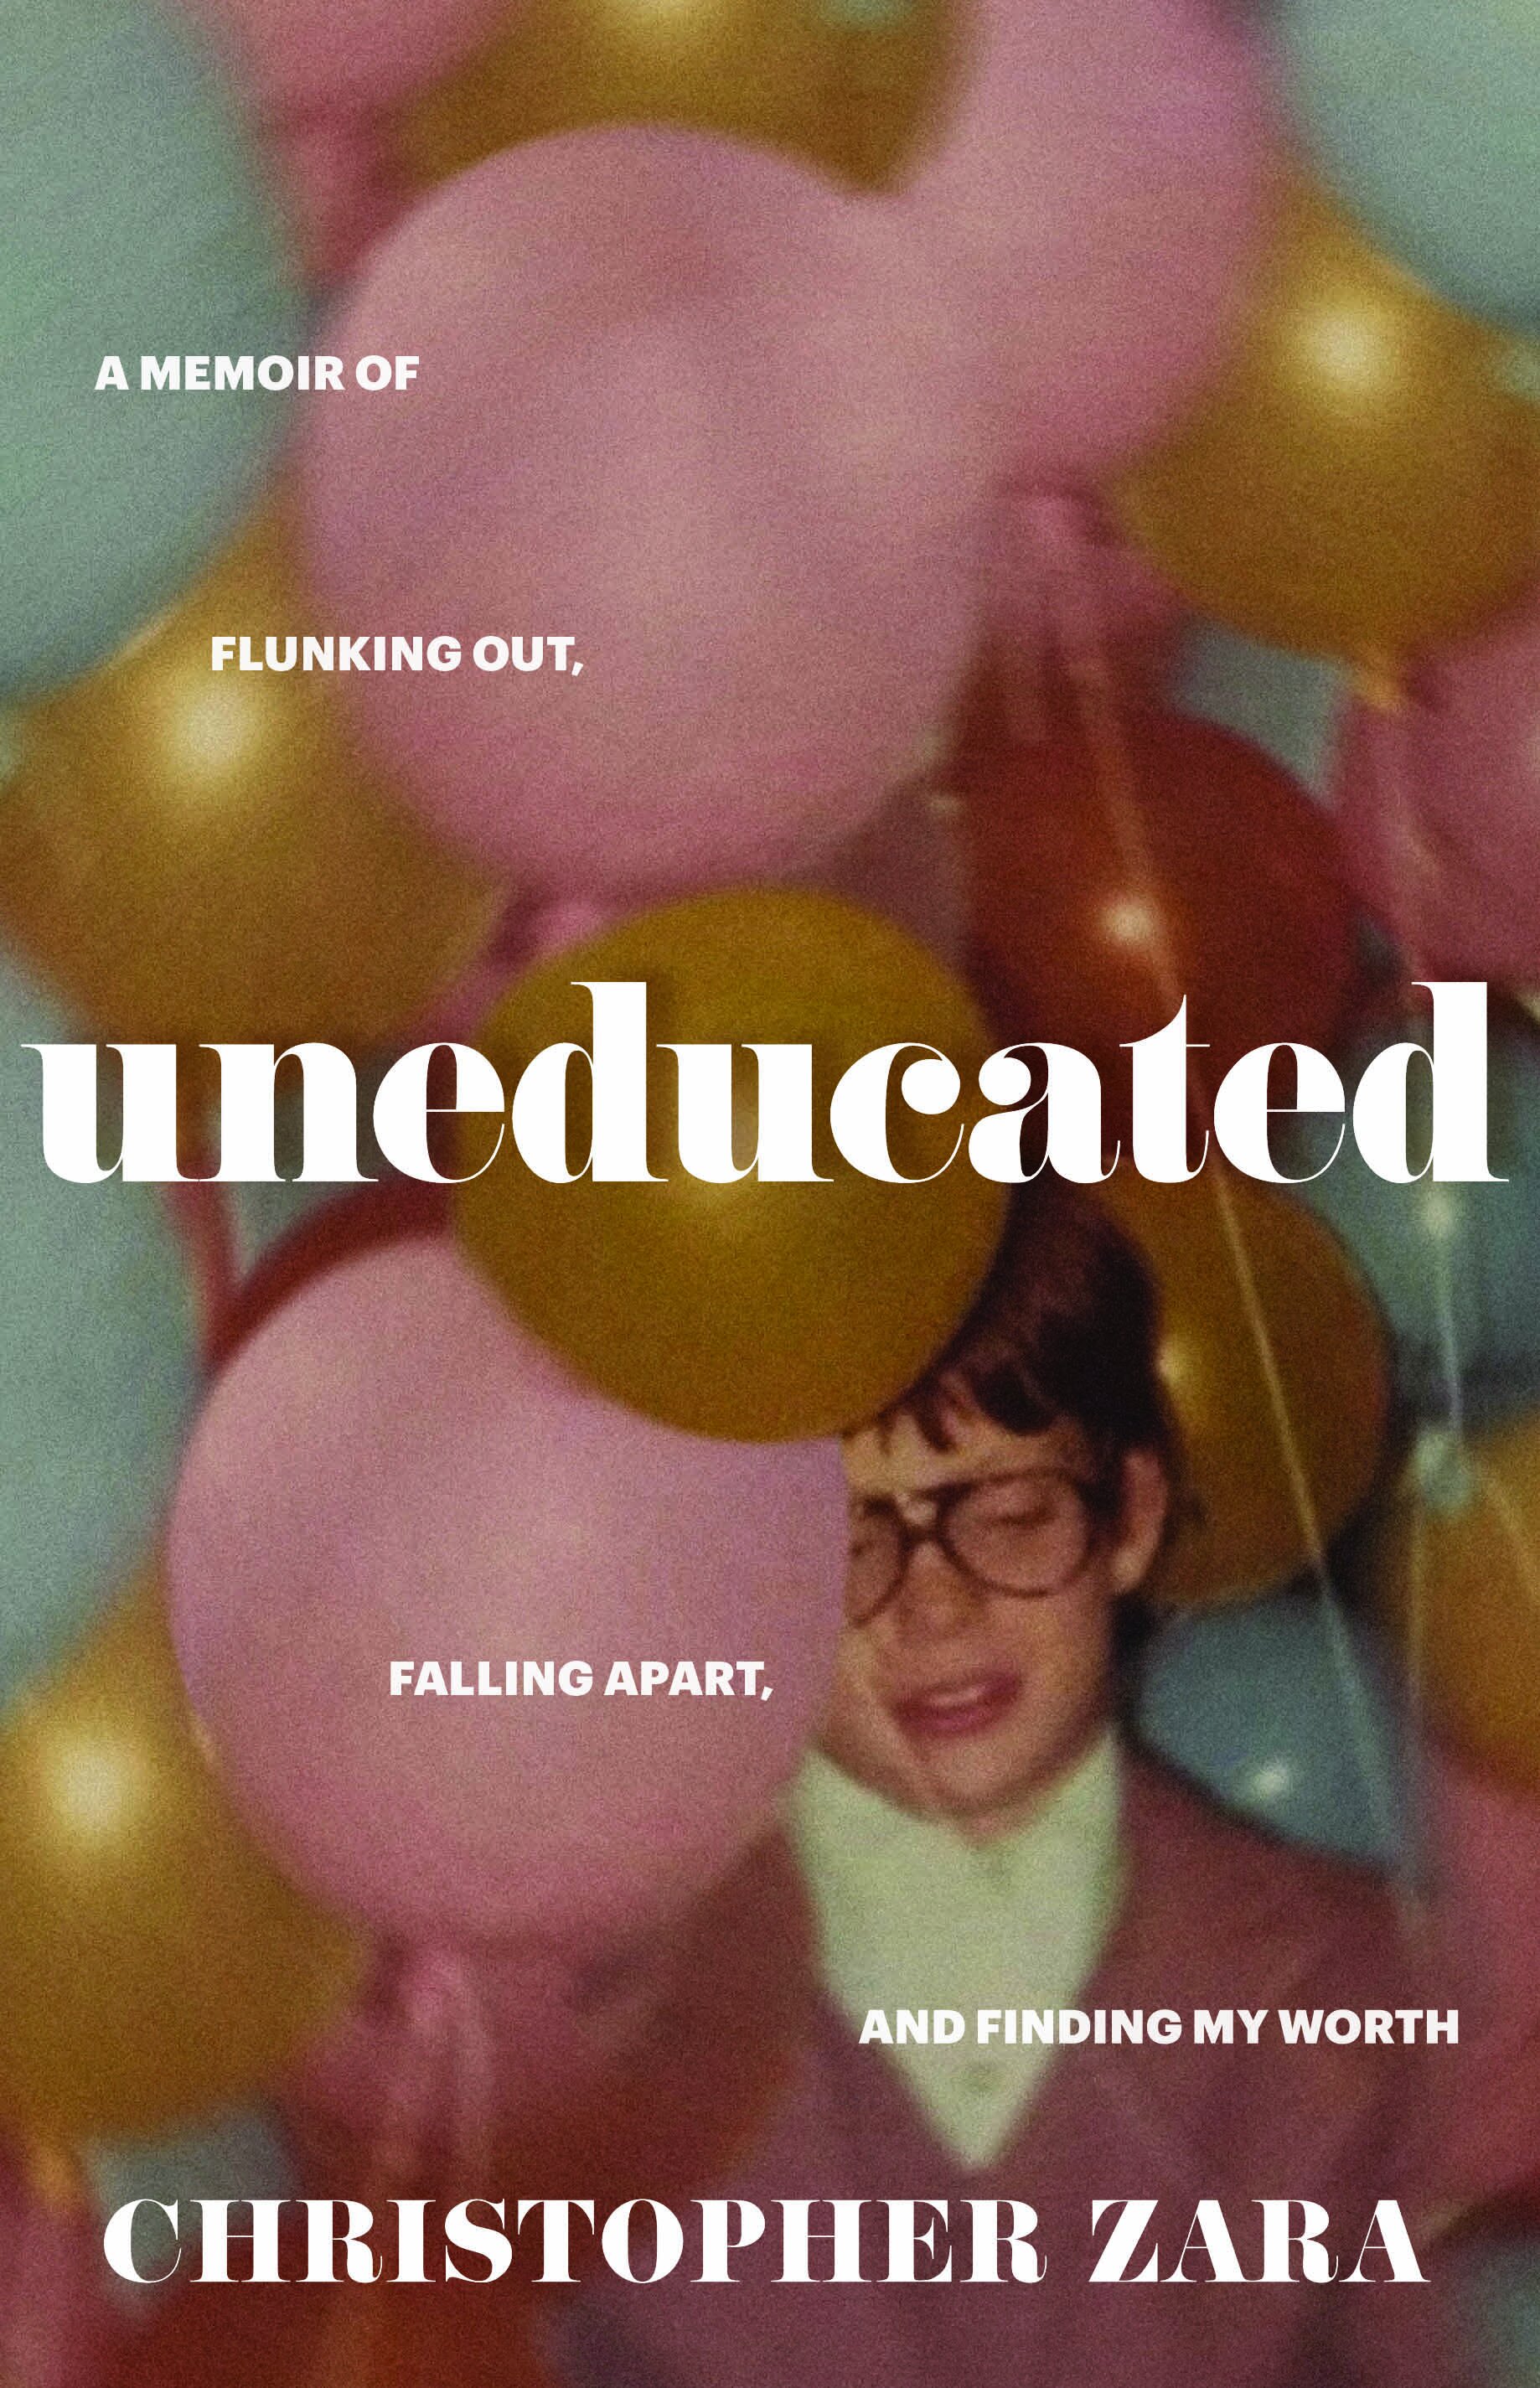  UNEDUCATED: A Memoir of Flunking Out, Falling Apart, and Finding My Worth by Christopher Zara 